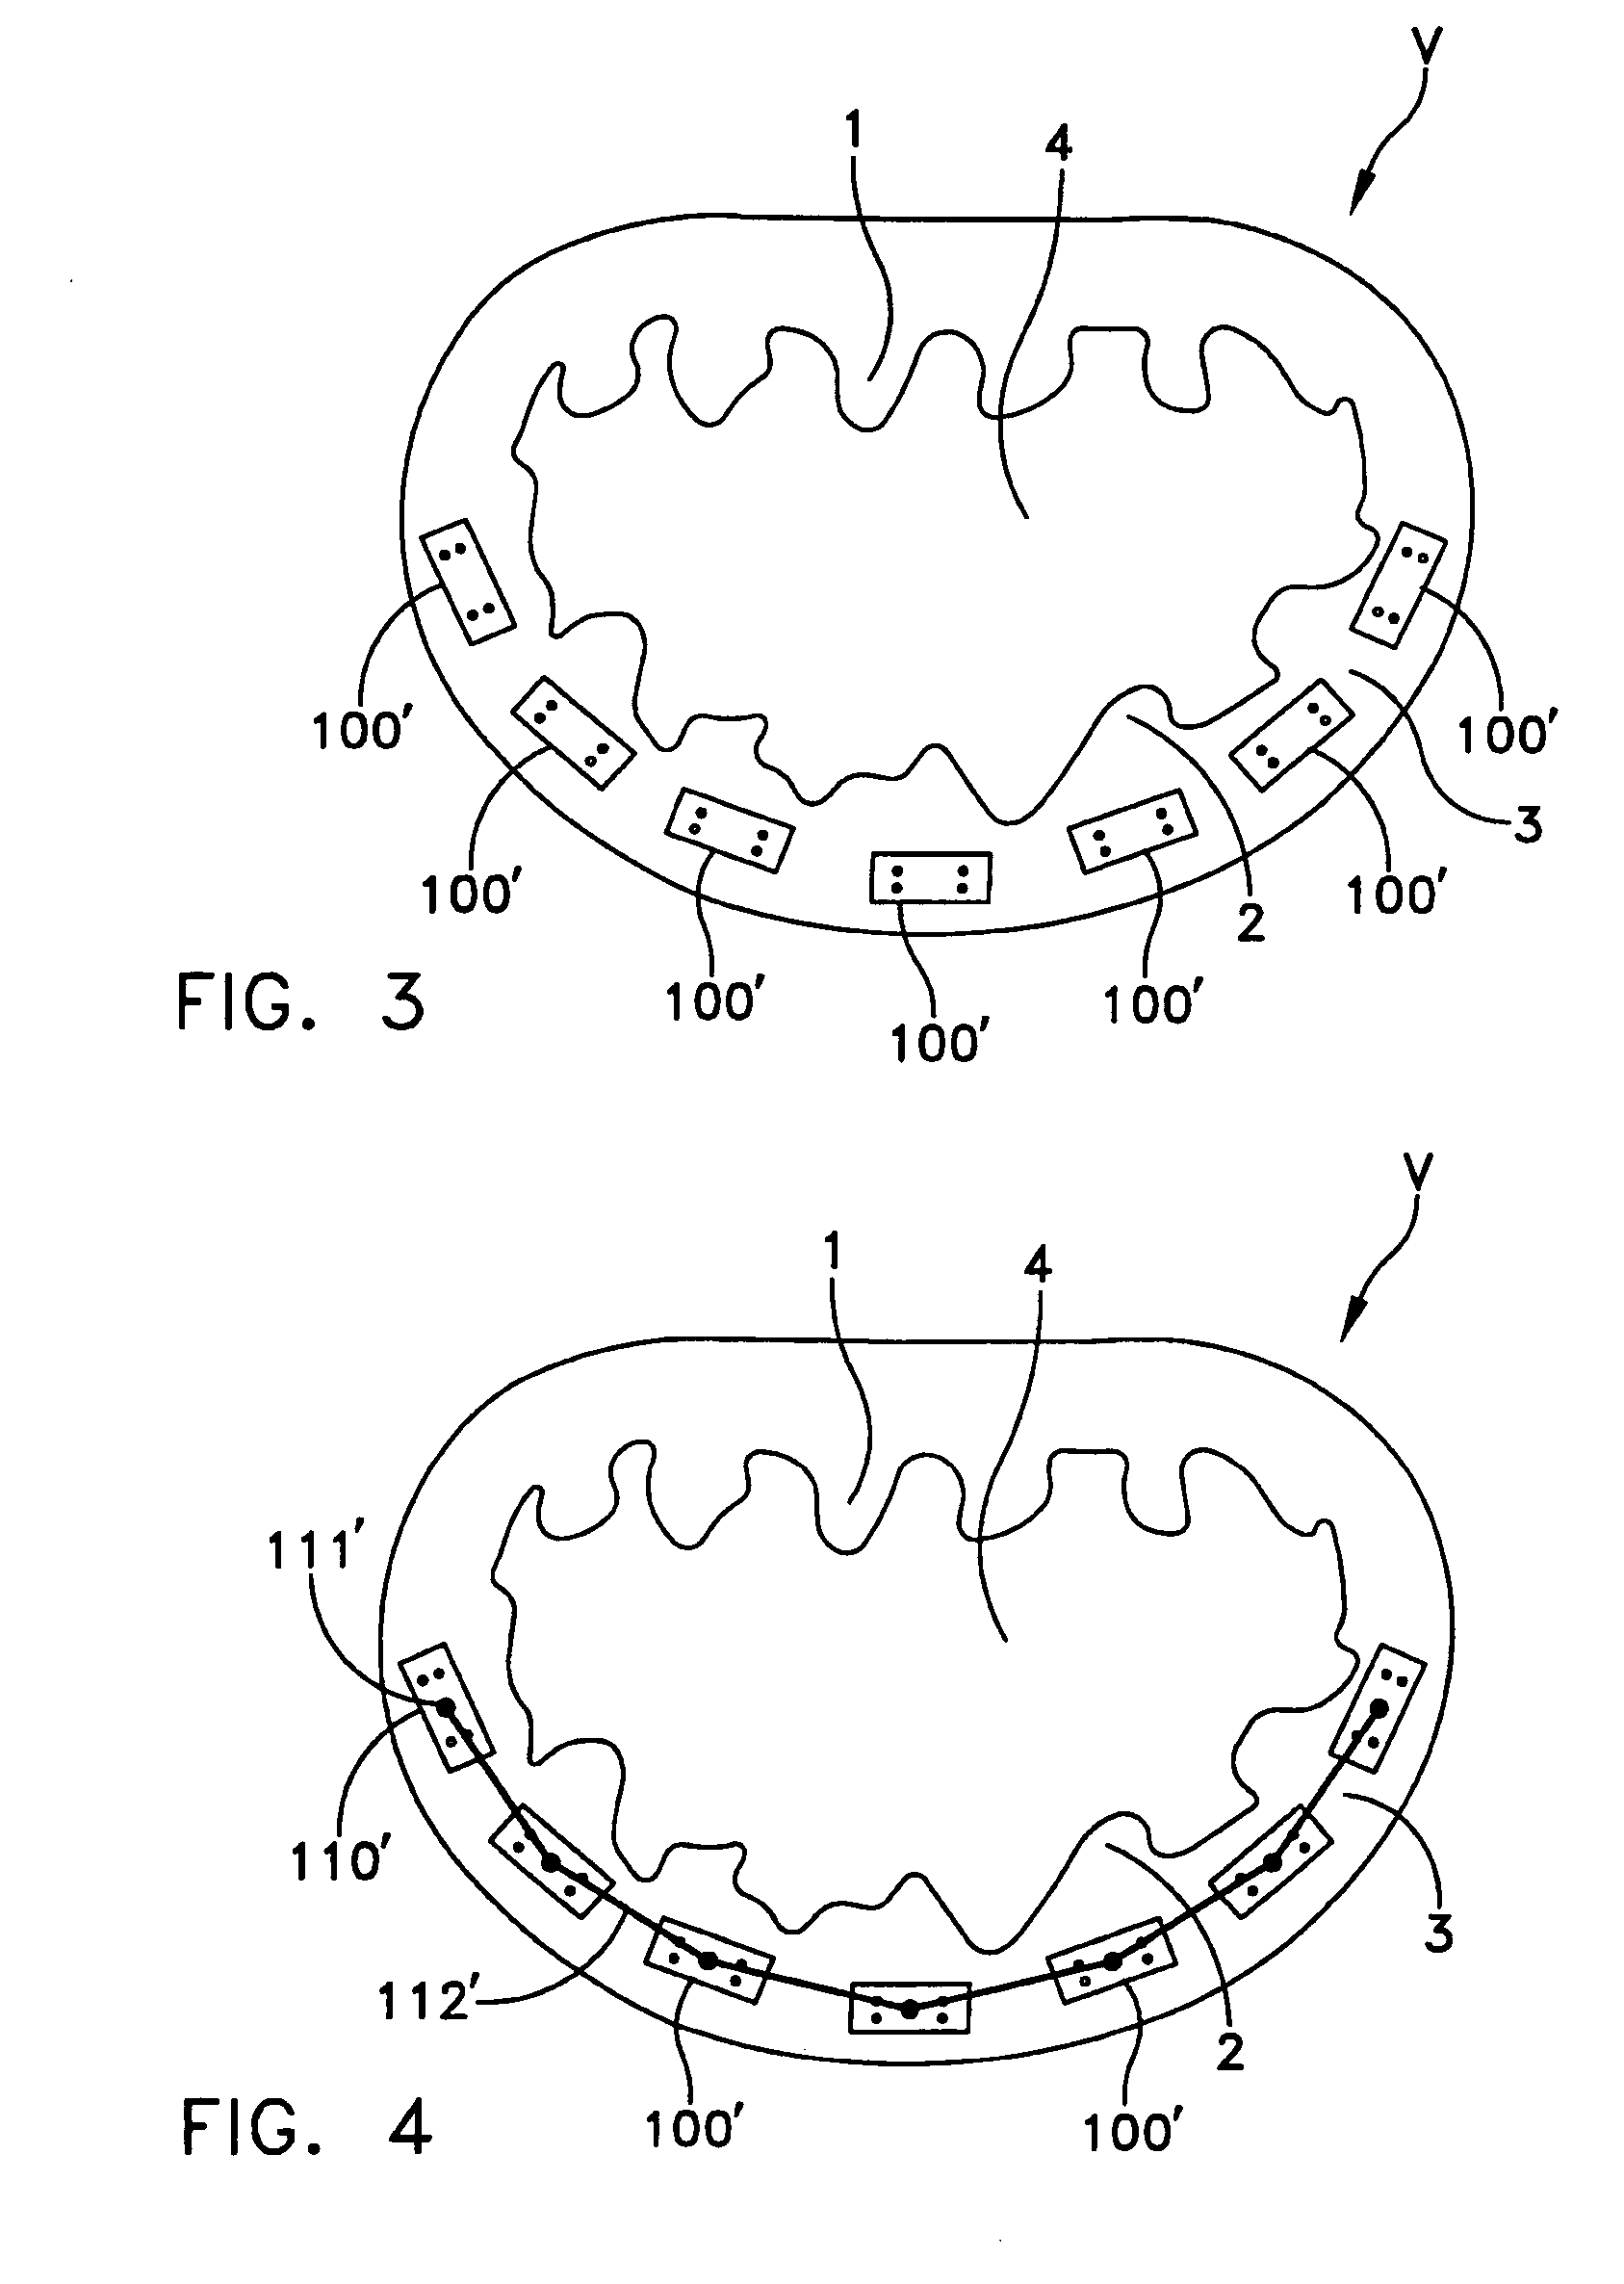 Automated annular plication for mitral valve repair